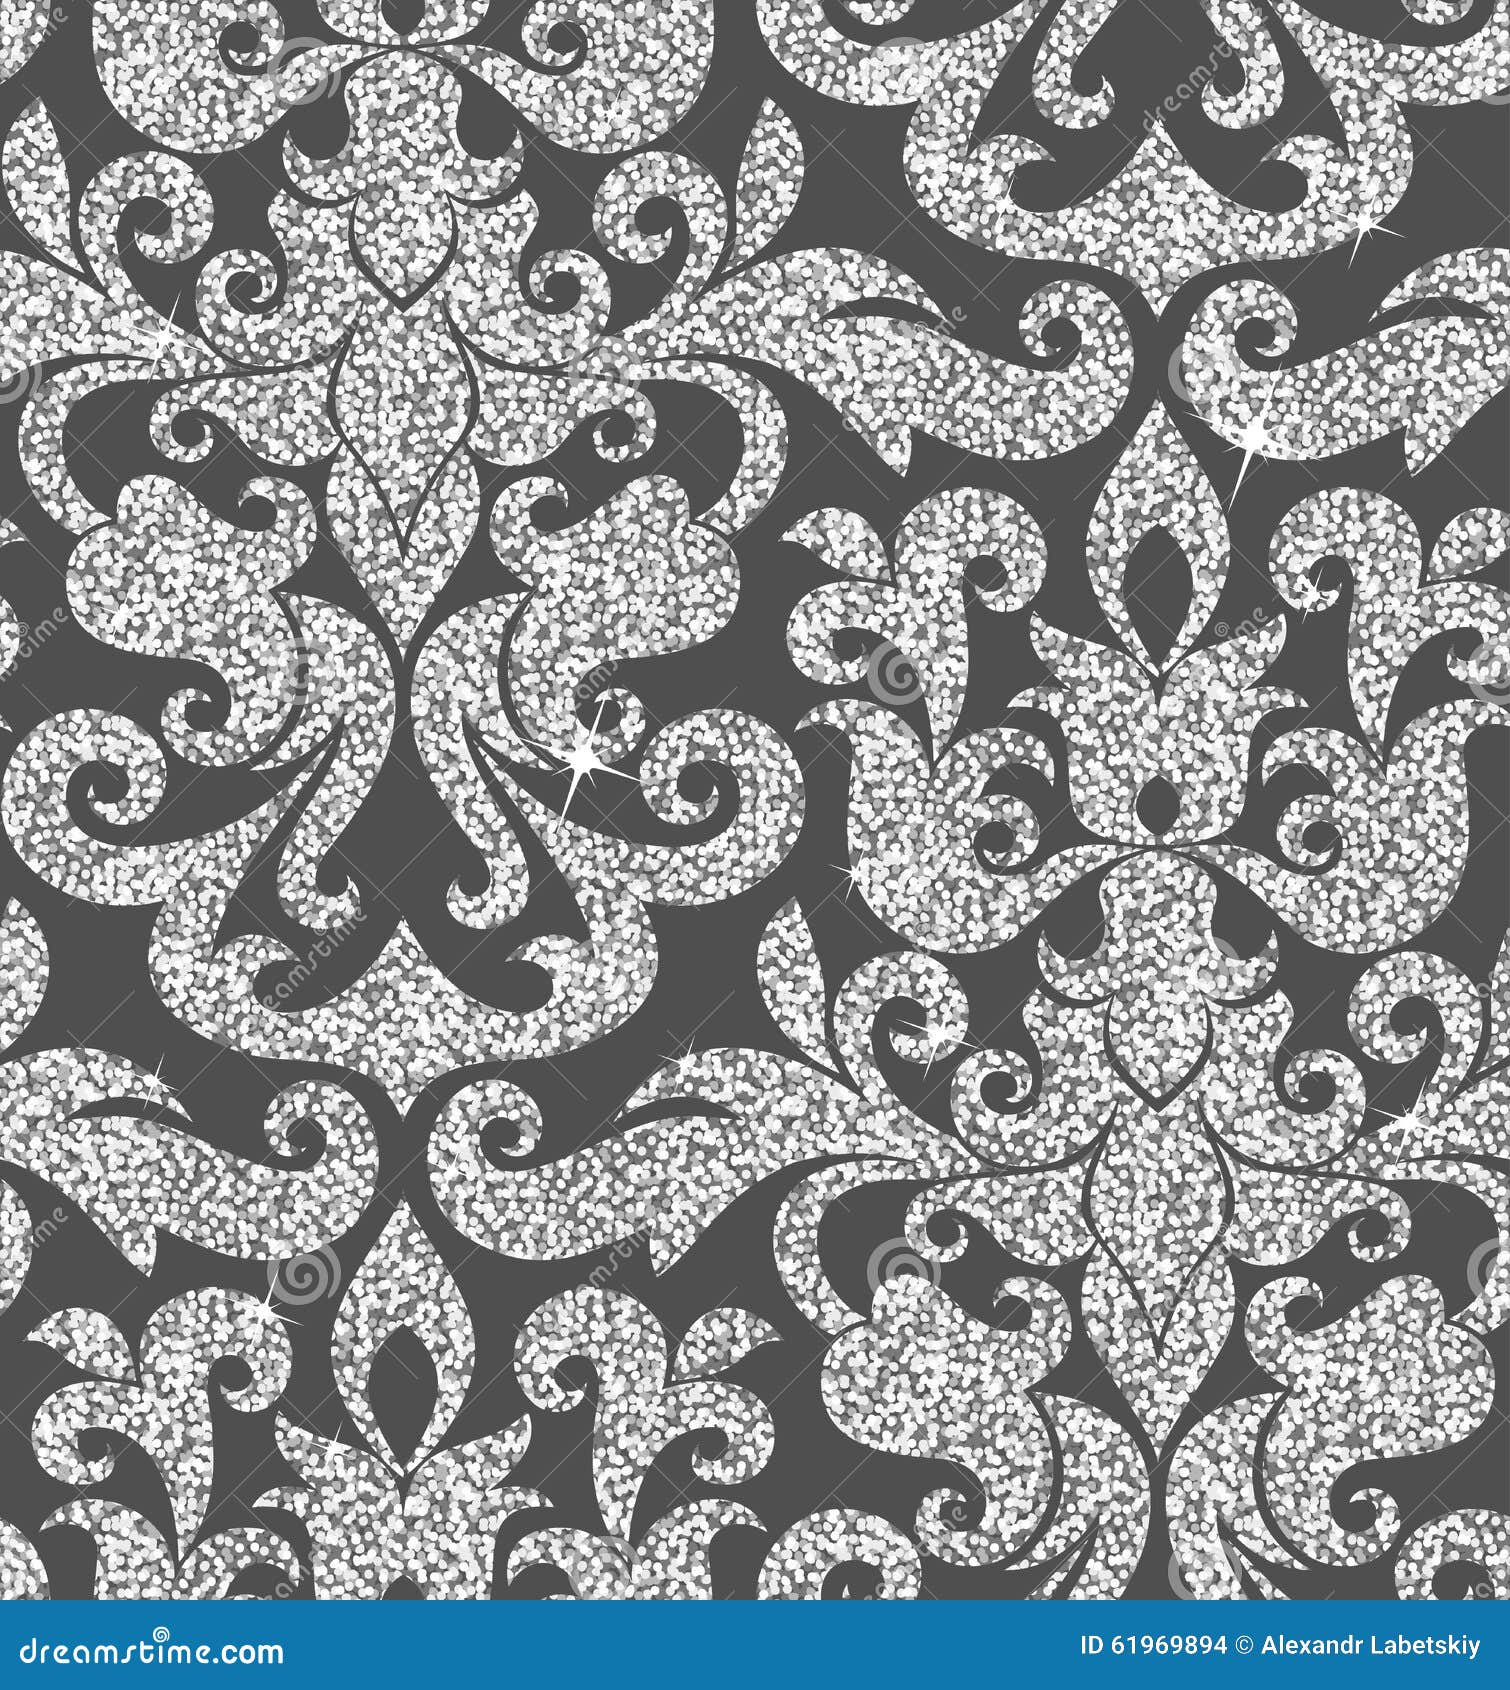 Floral silver wallpaper stock vector. Illustration of glamour - 61969894